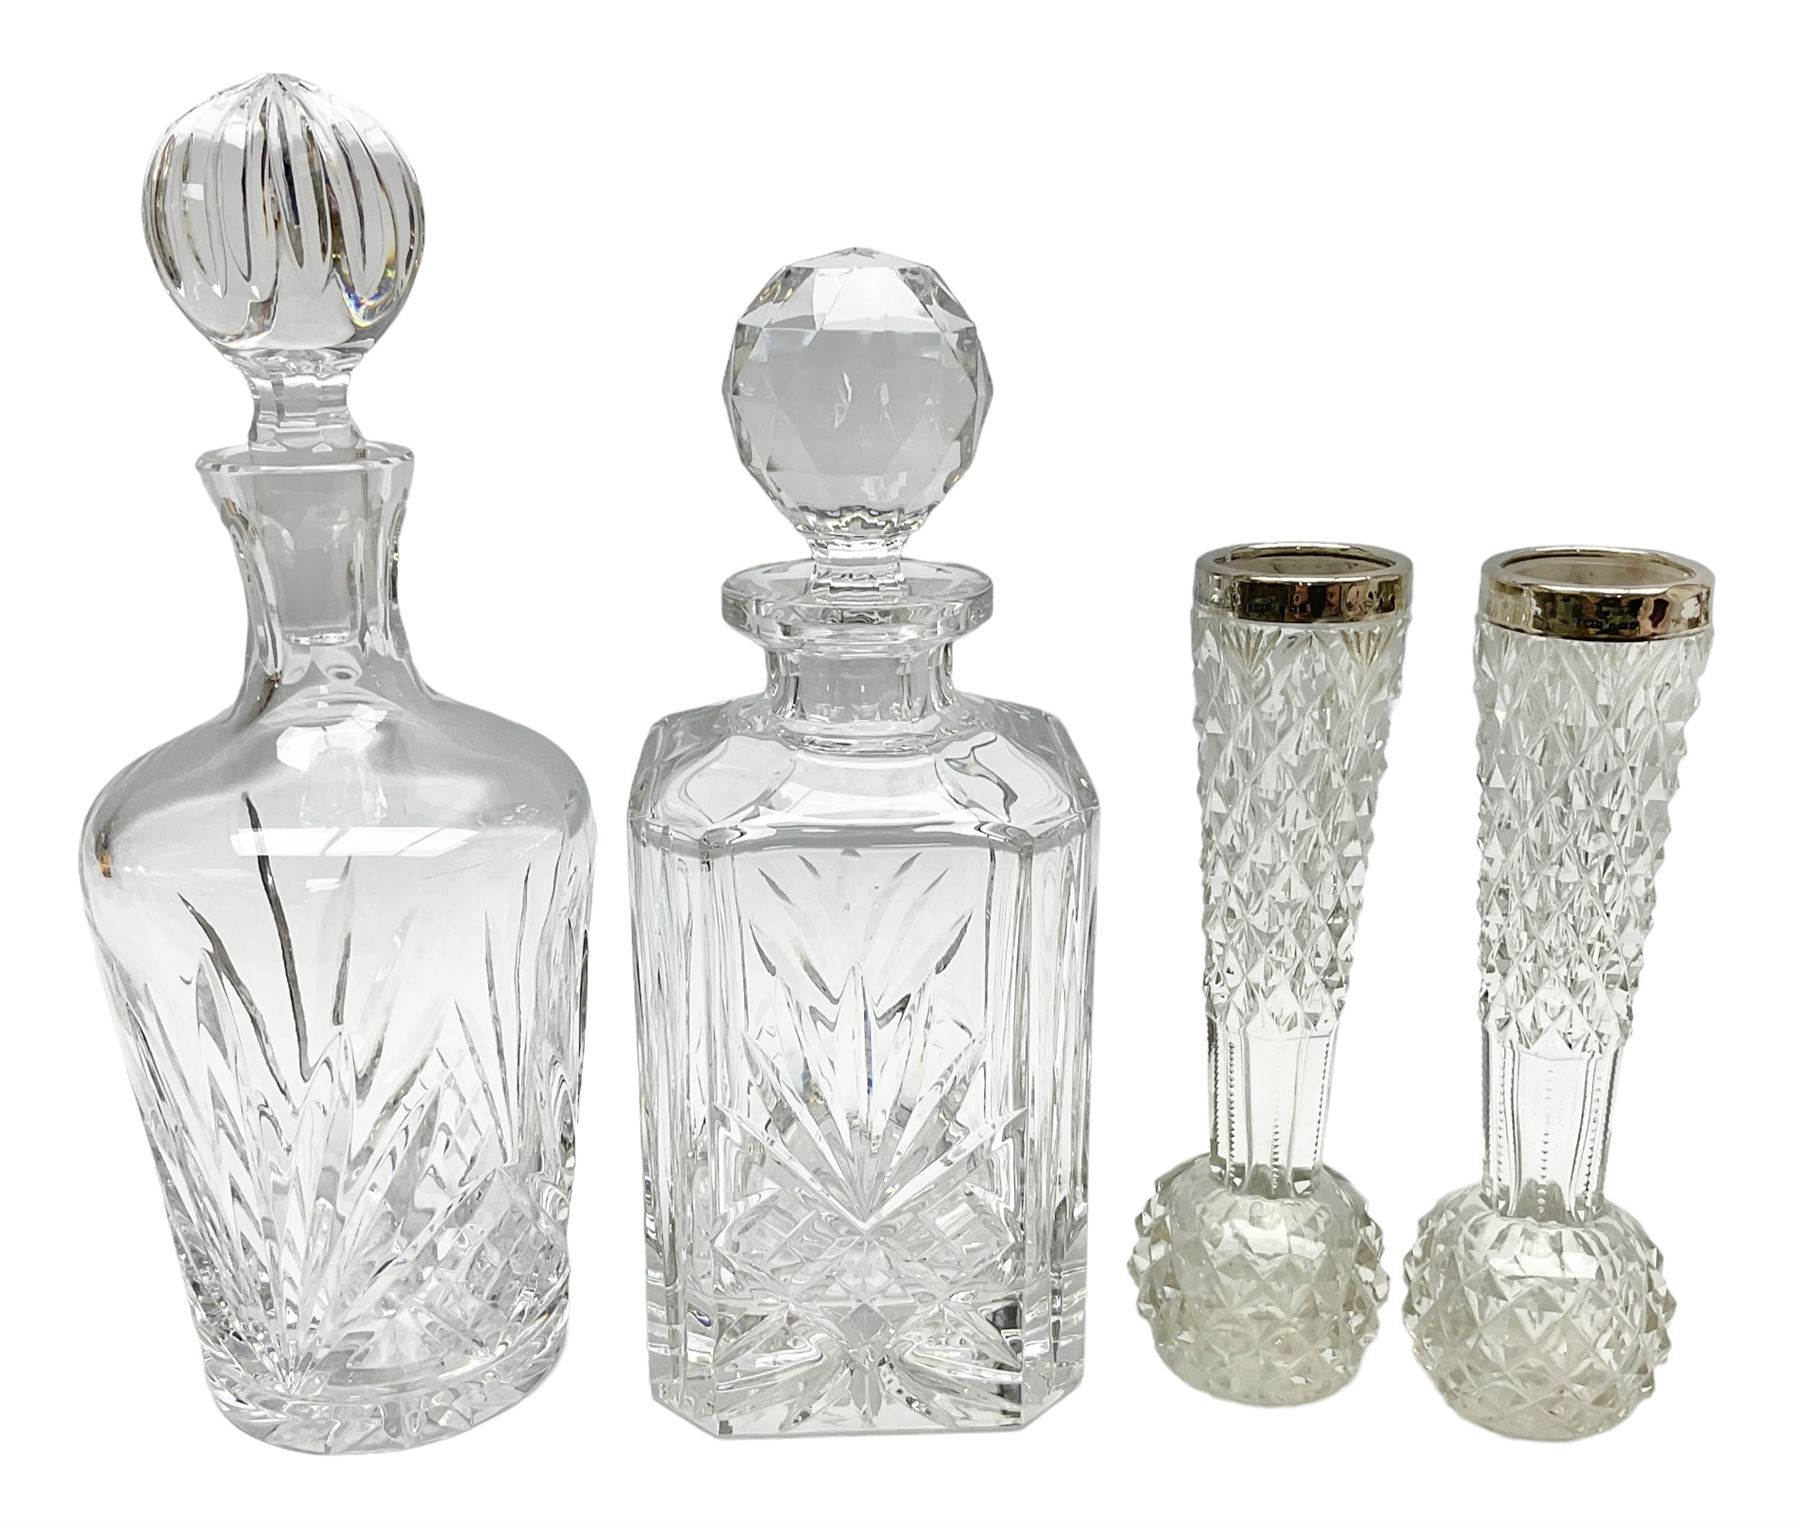 Silver collared cut glass vases